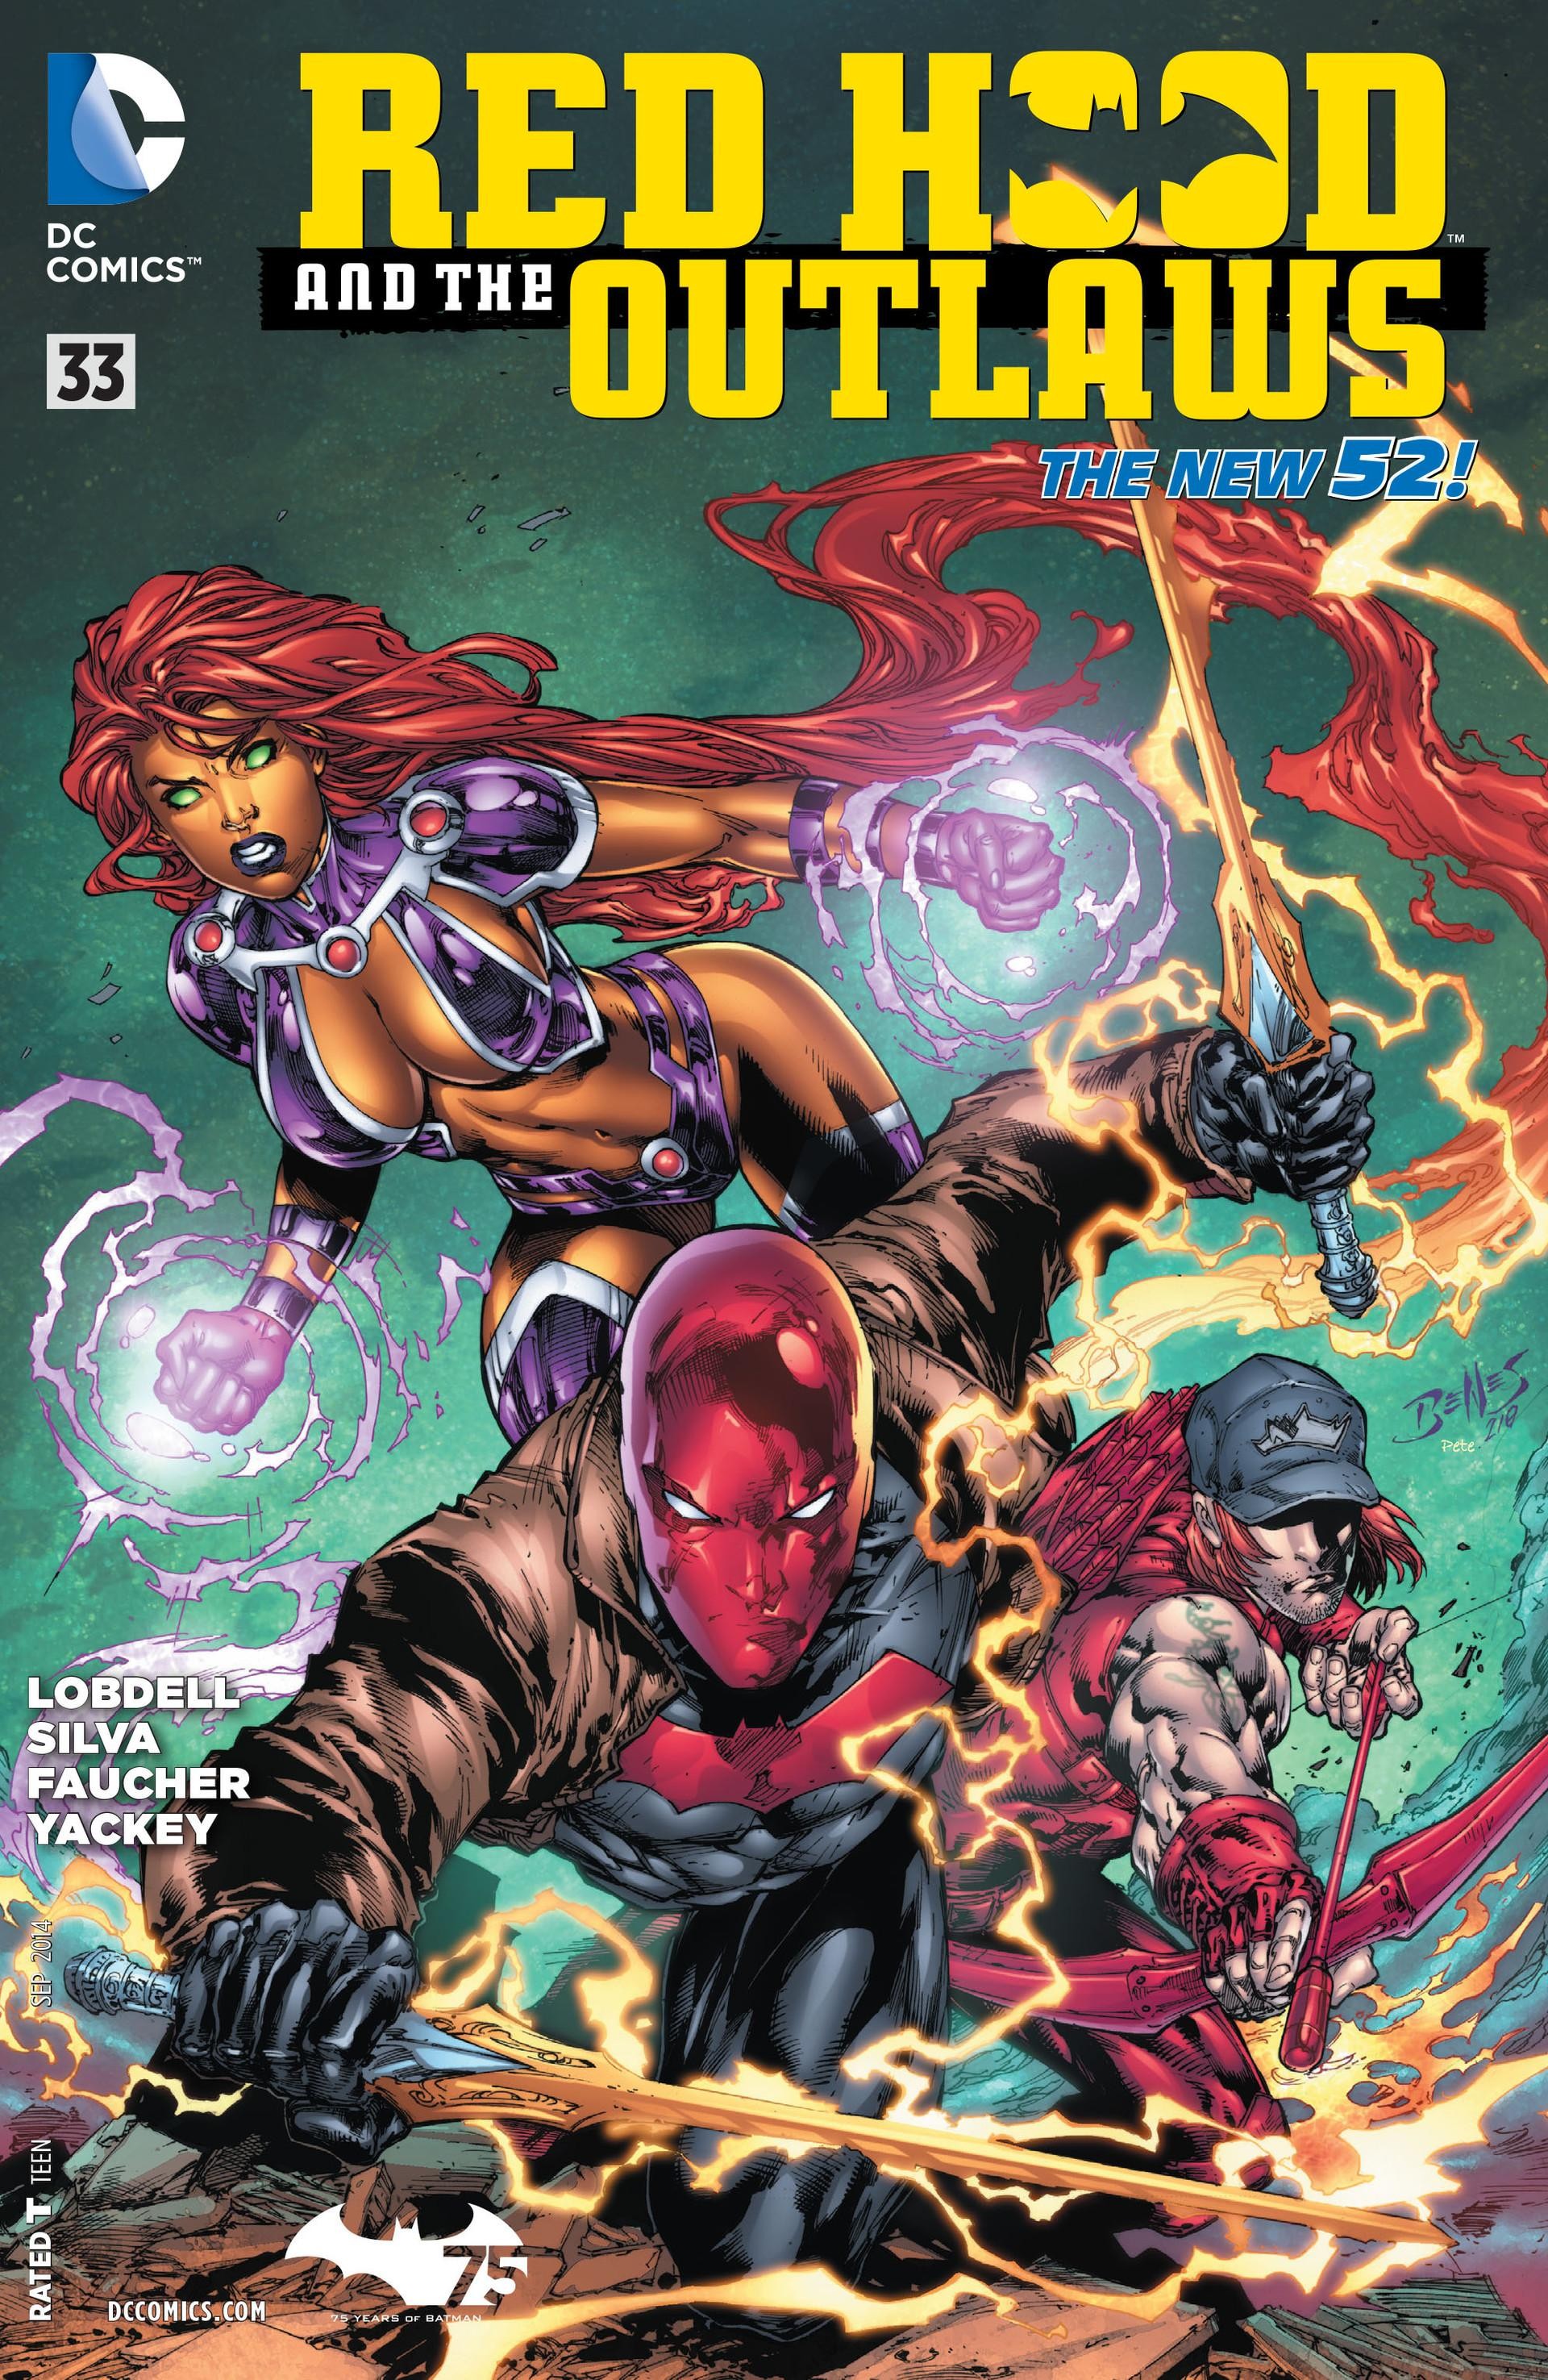 Red Hood and the Outlaws Vol. 1 #33